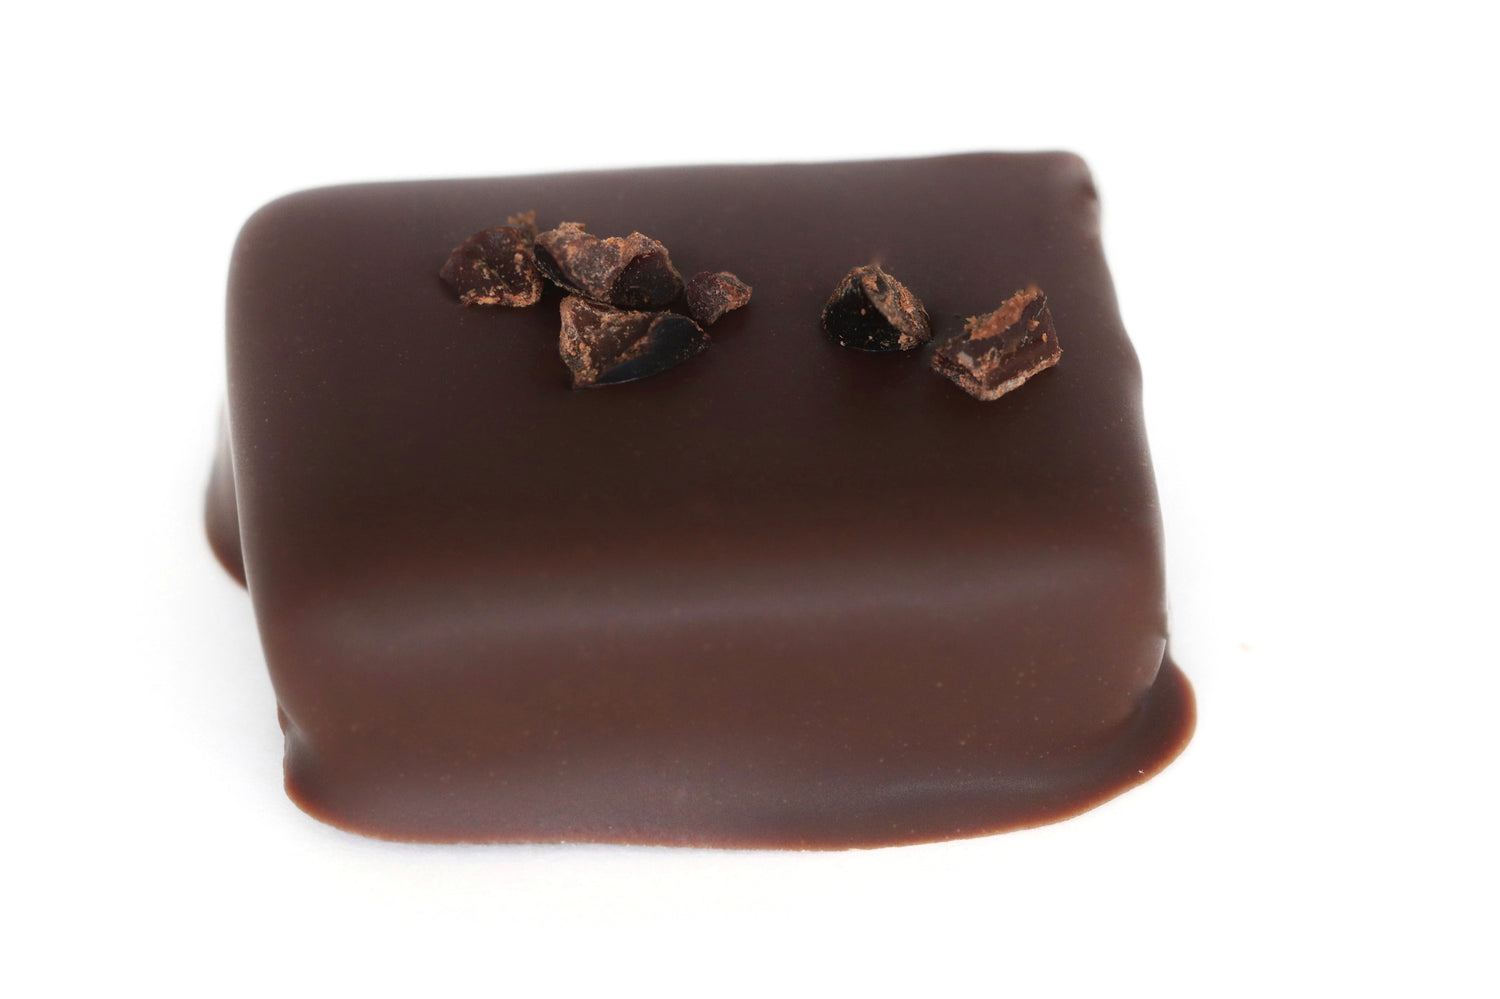 Sour Cherry & Cocoa Nibs confection